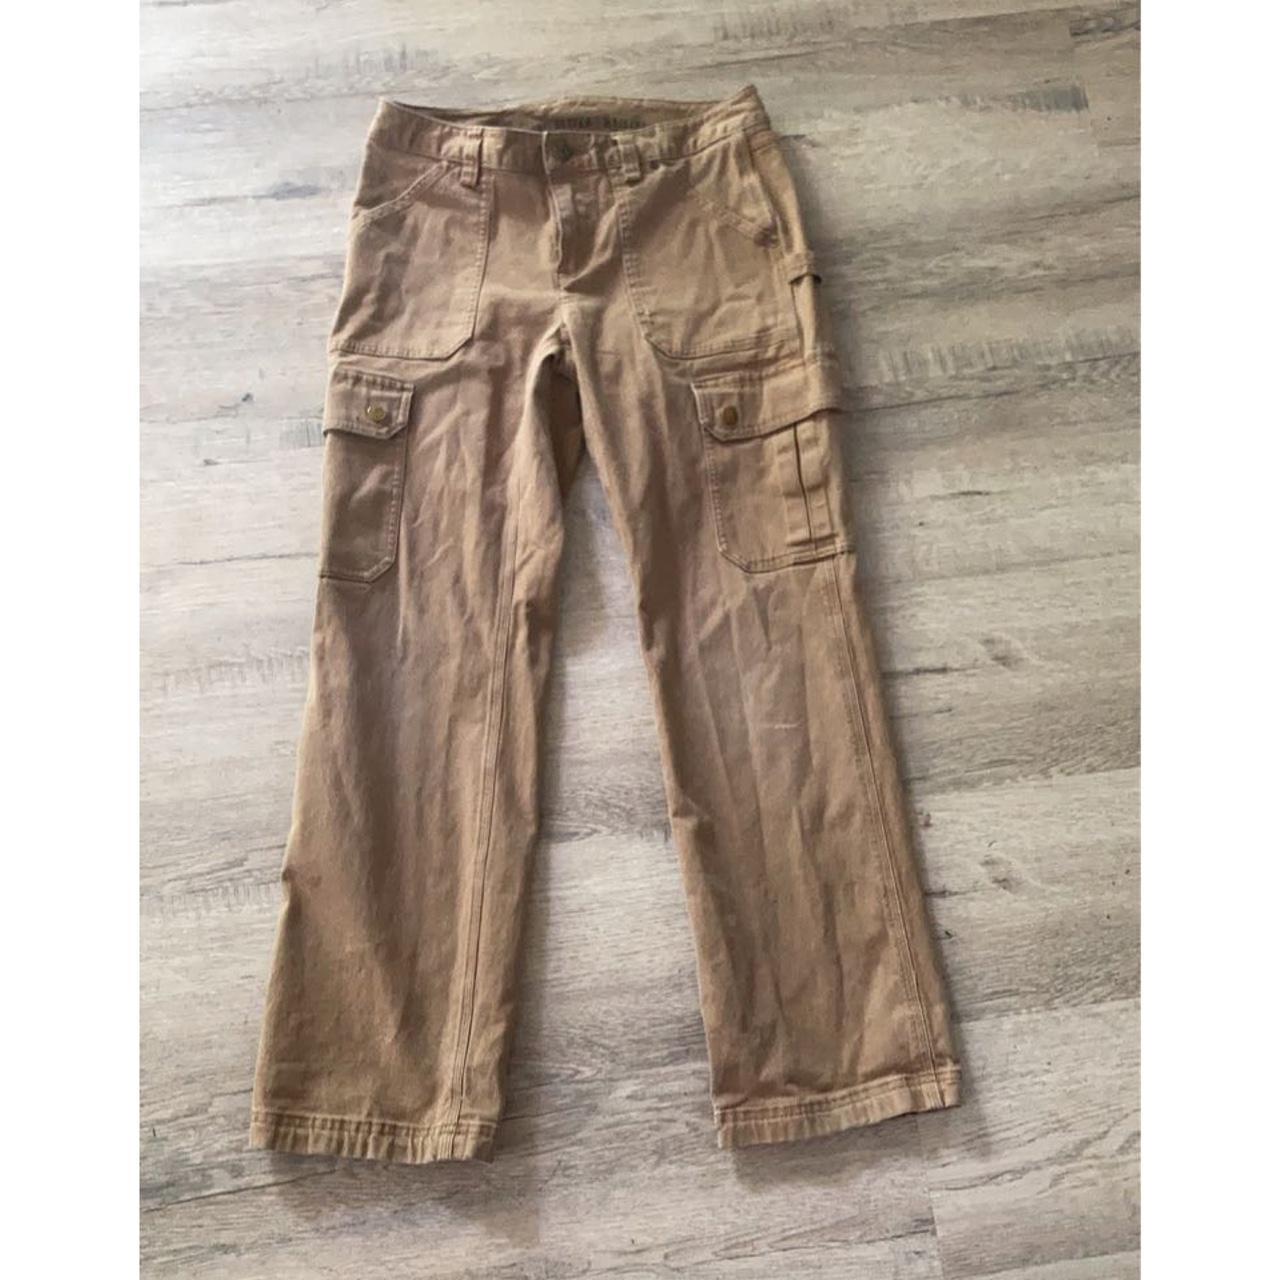 Duluth Trading Company Women's Trousers (4)